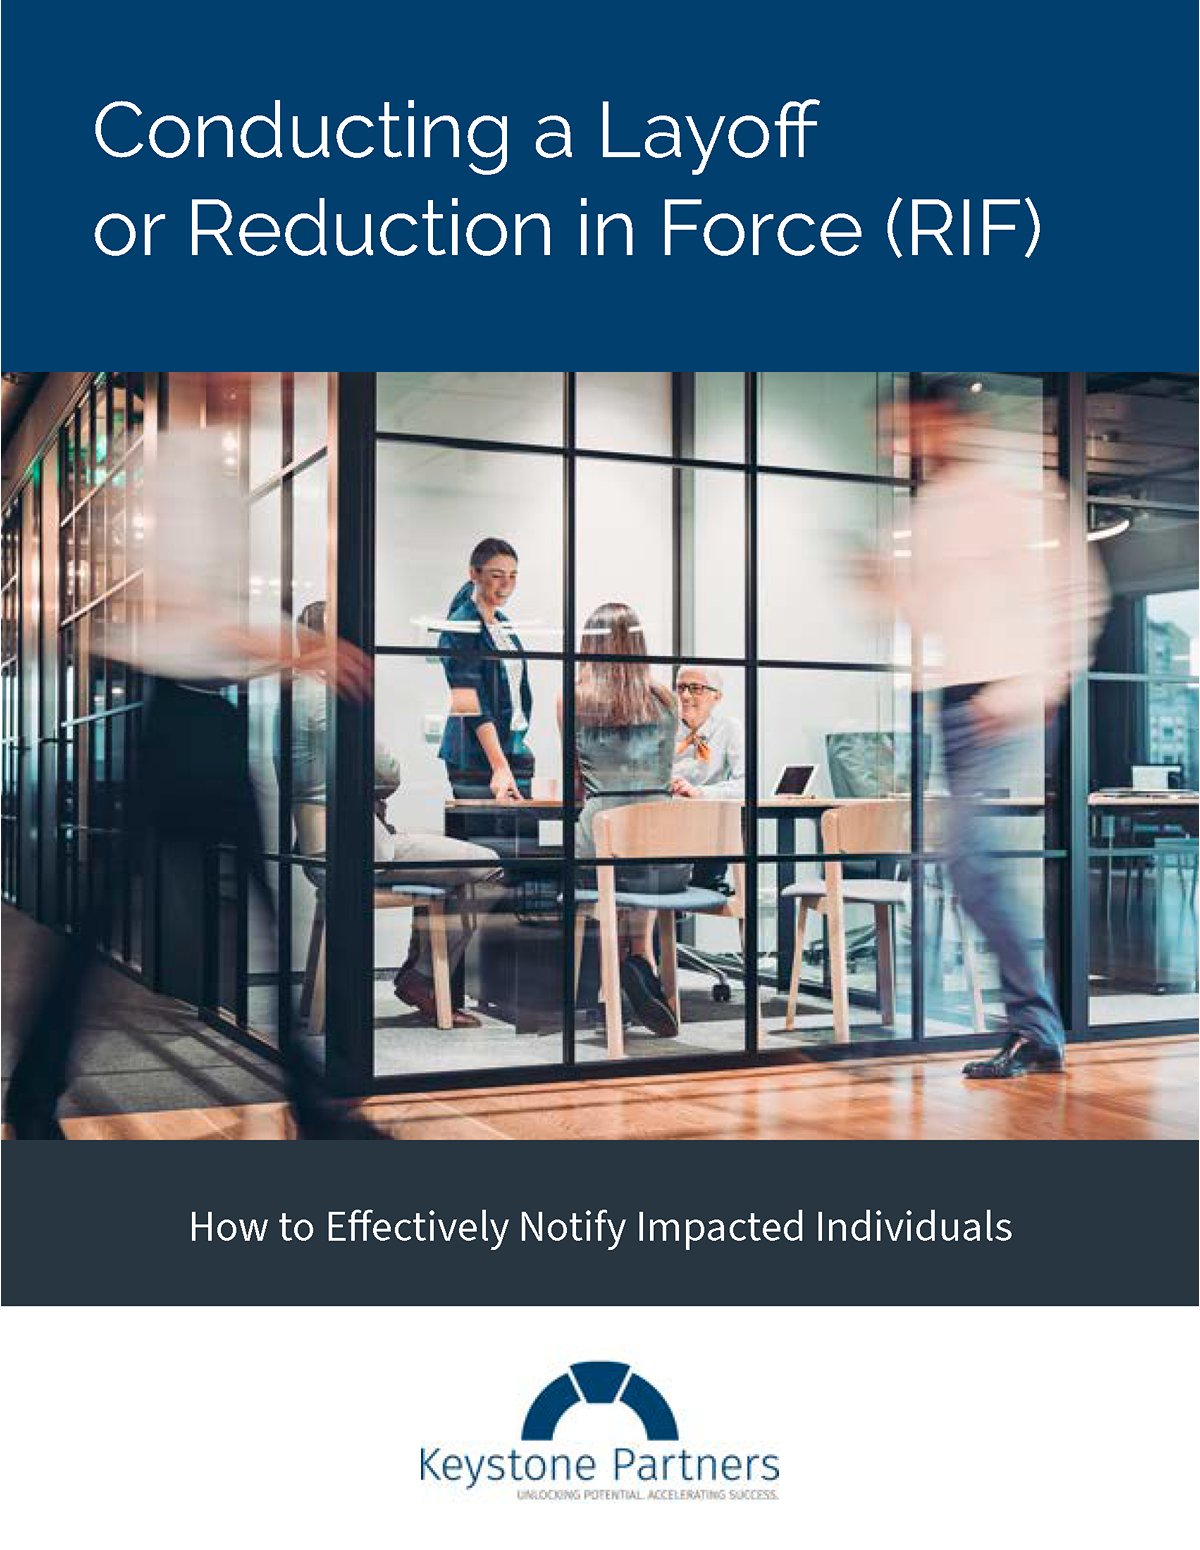 Conducting a Layoff or Reduction in Force (RIF): How to Effectively Notify Impacted Individuals